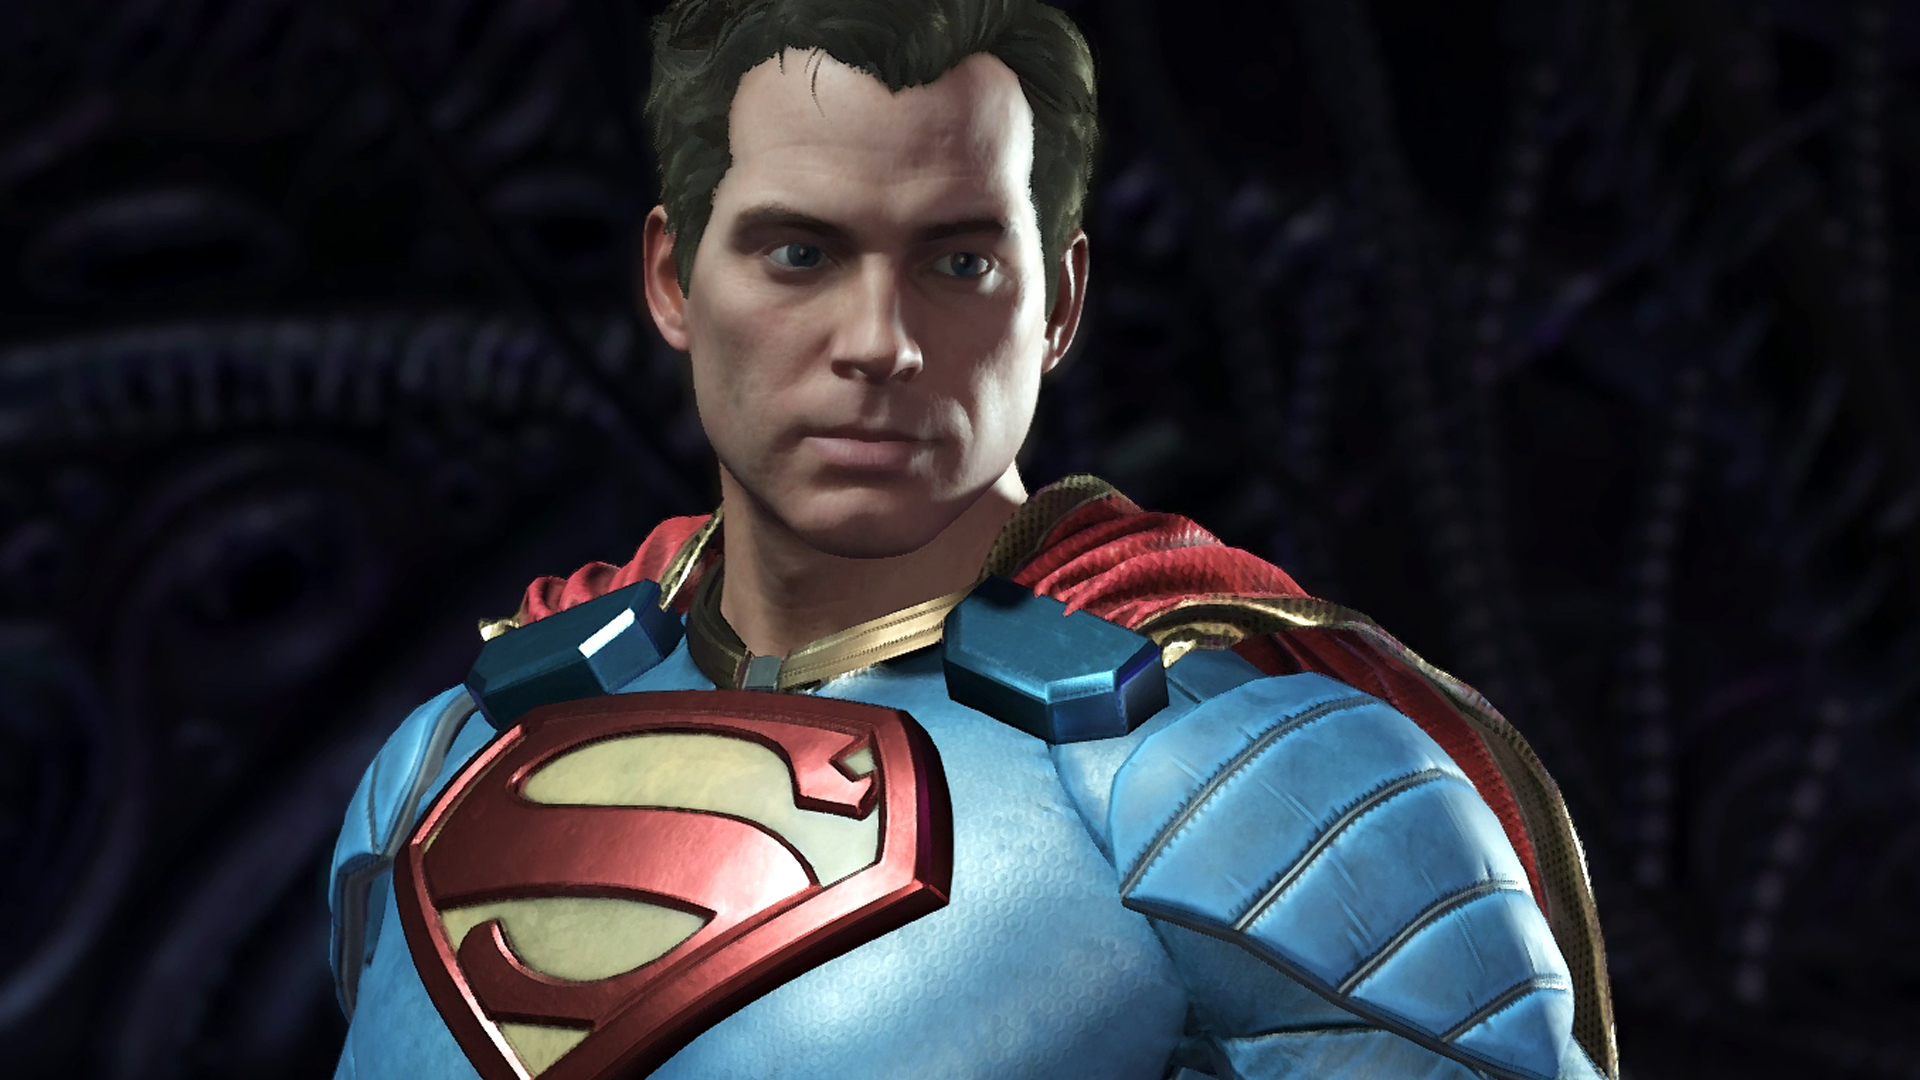 You can play as Superman in The Matrix Unreal 5 demo